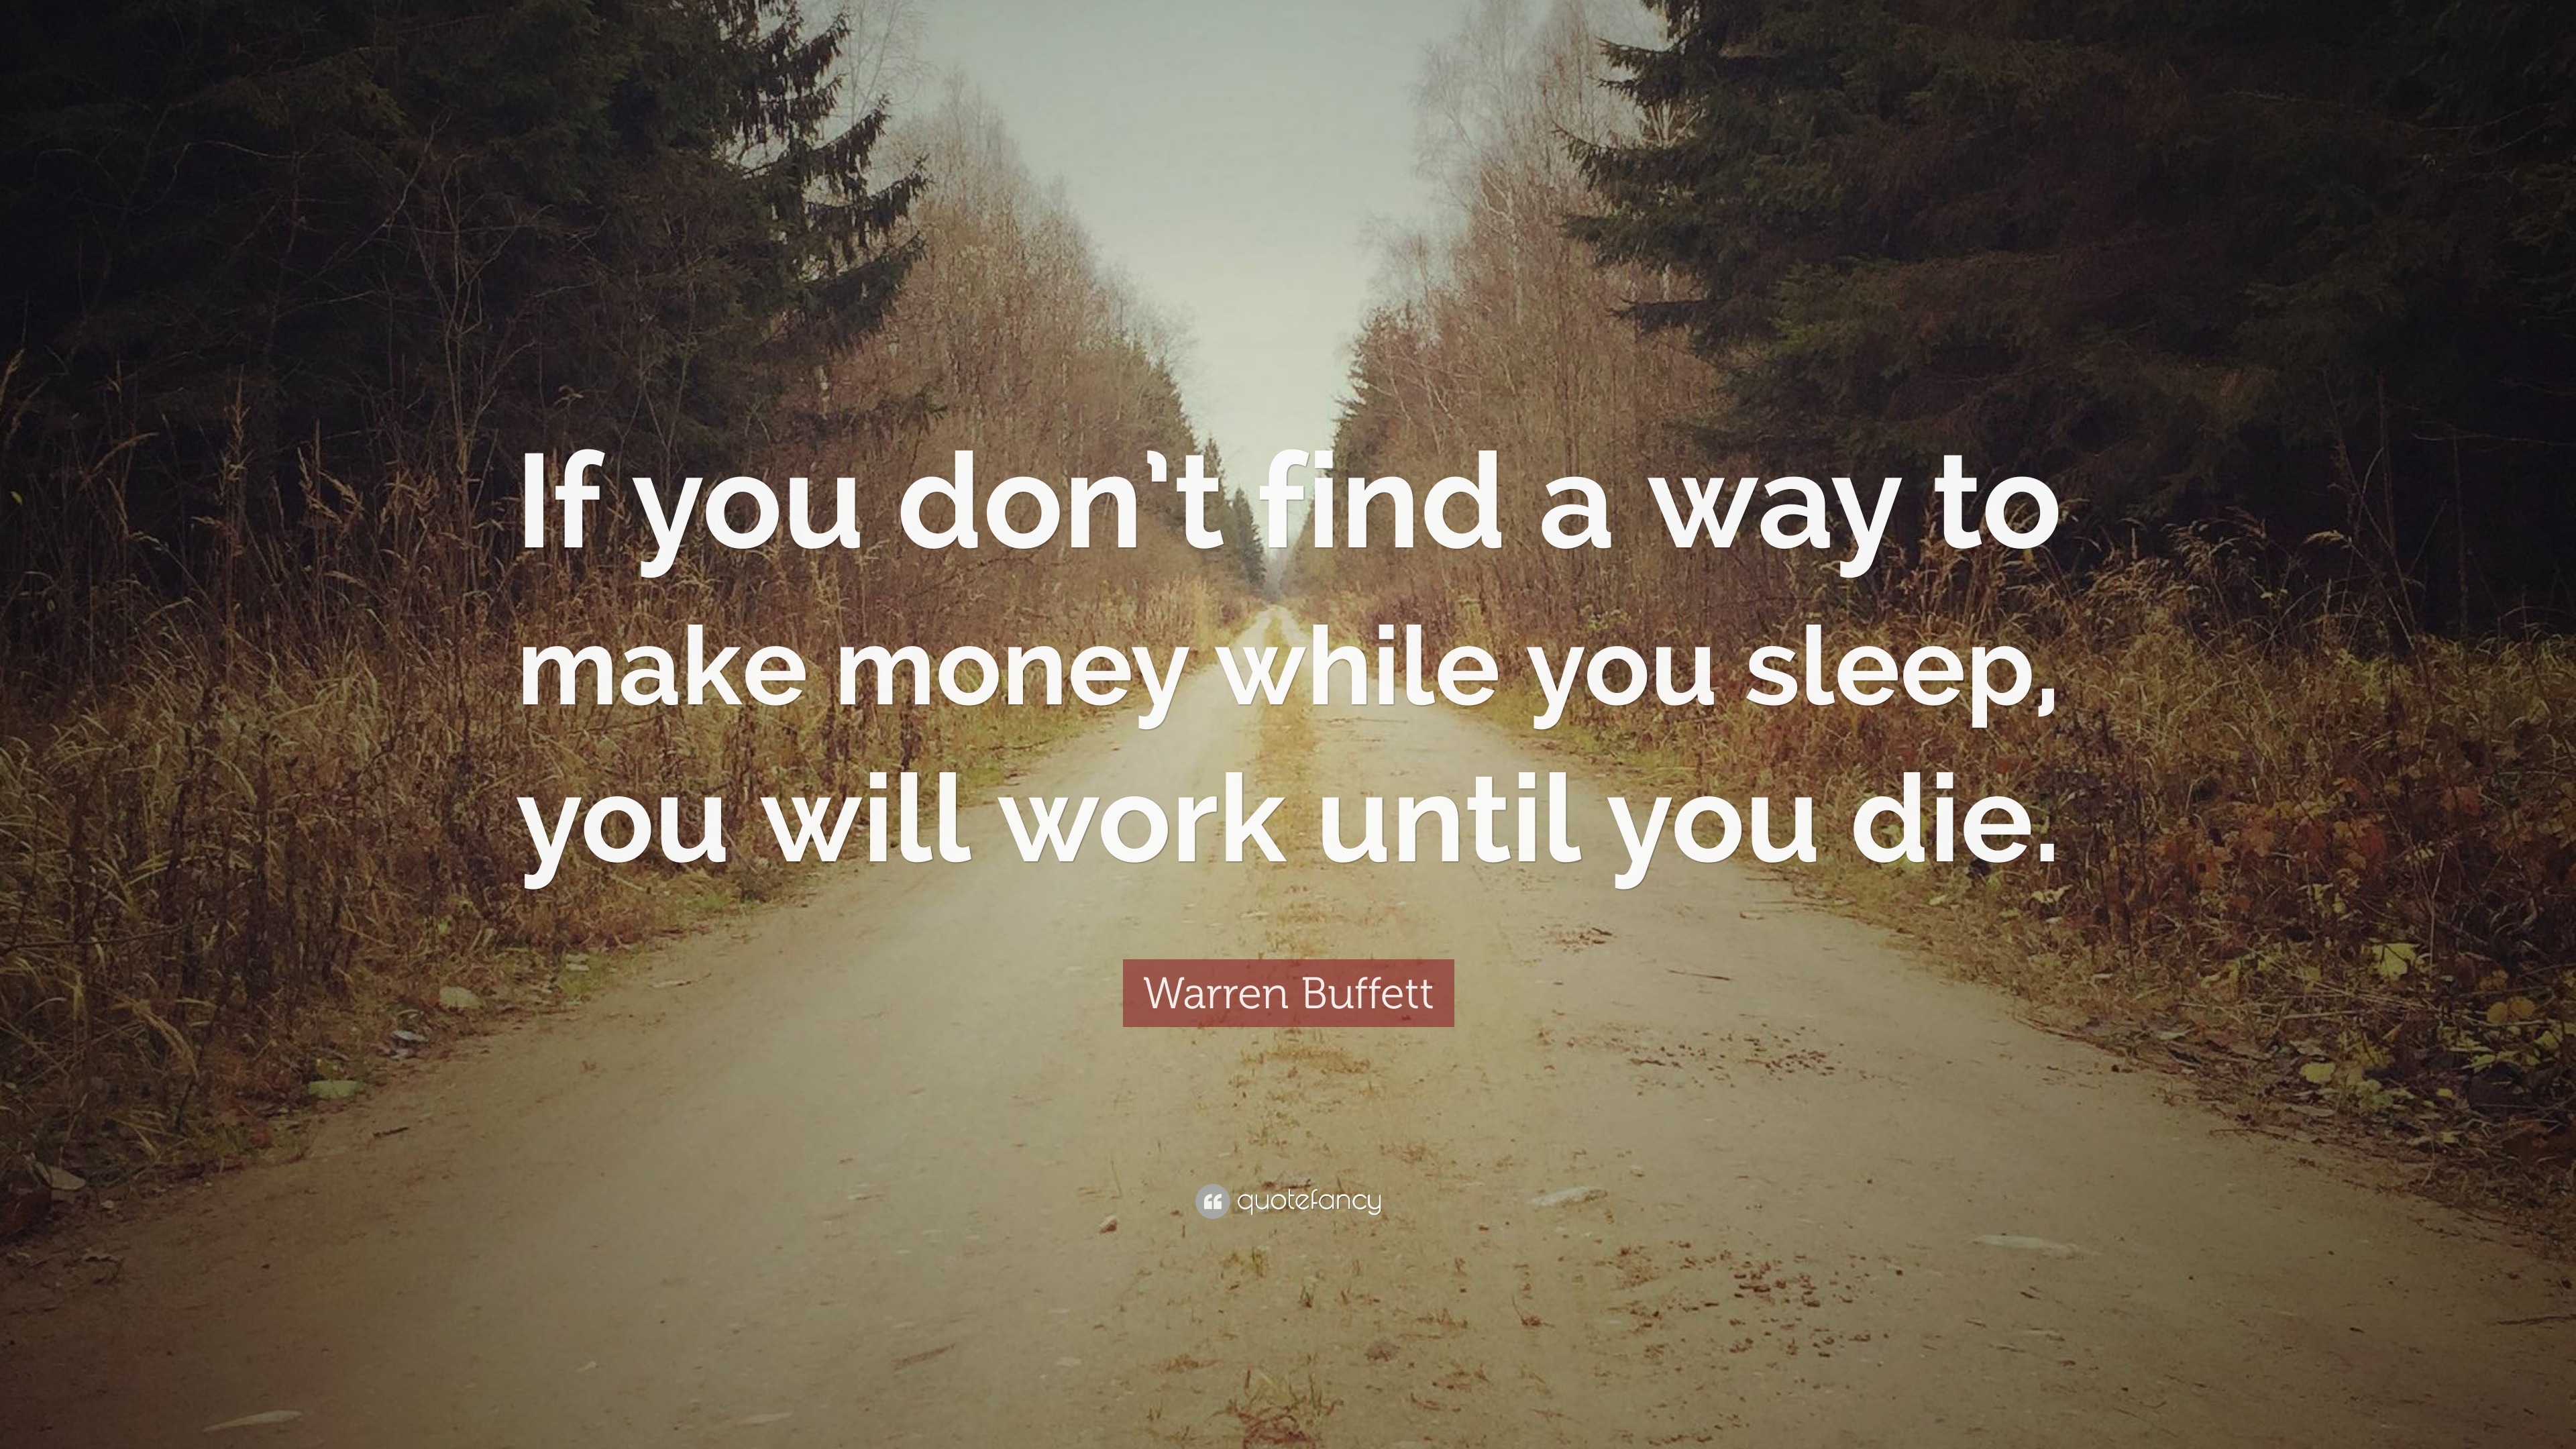 Warren Buffett Quote: “If You Don't Find A Way To Make Money While You Sleep,